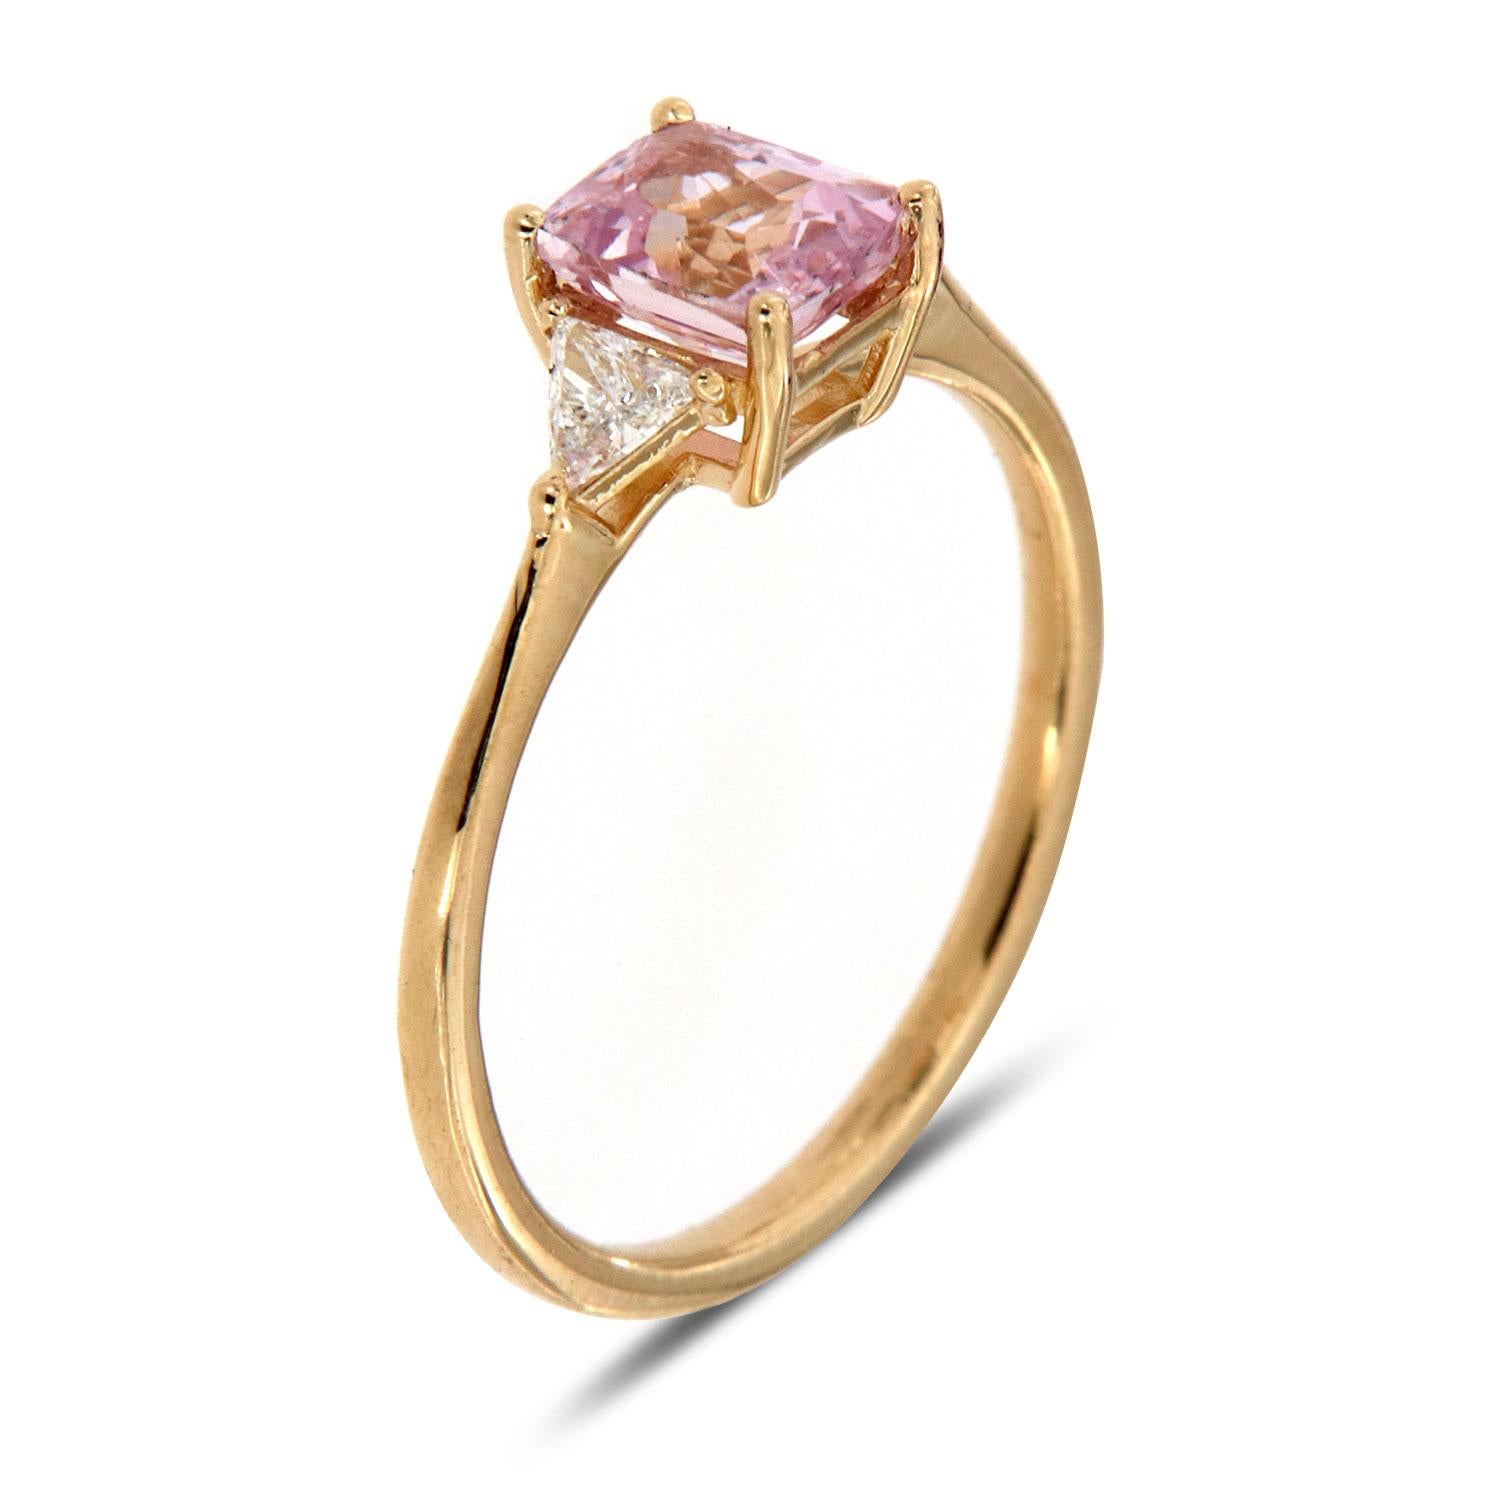 This Classic Three Stone ring features a 0.97 Radaint Shaped Natural unheated Light Pink-Peach color flanked by two perfectly matched Triallion cut diamond weight 0.38 Carat. The ring is 1.4 mm wide, tapering to 3 mm. The ring sizable and can be